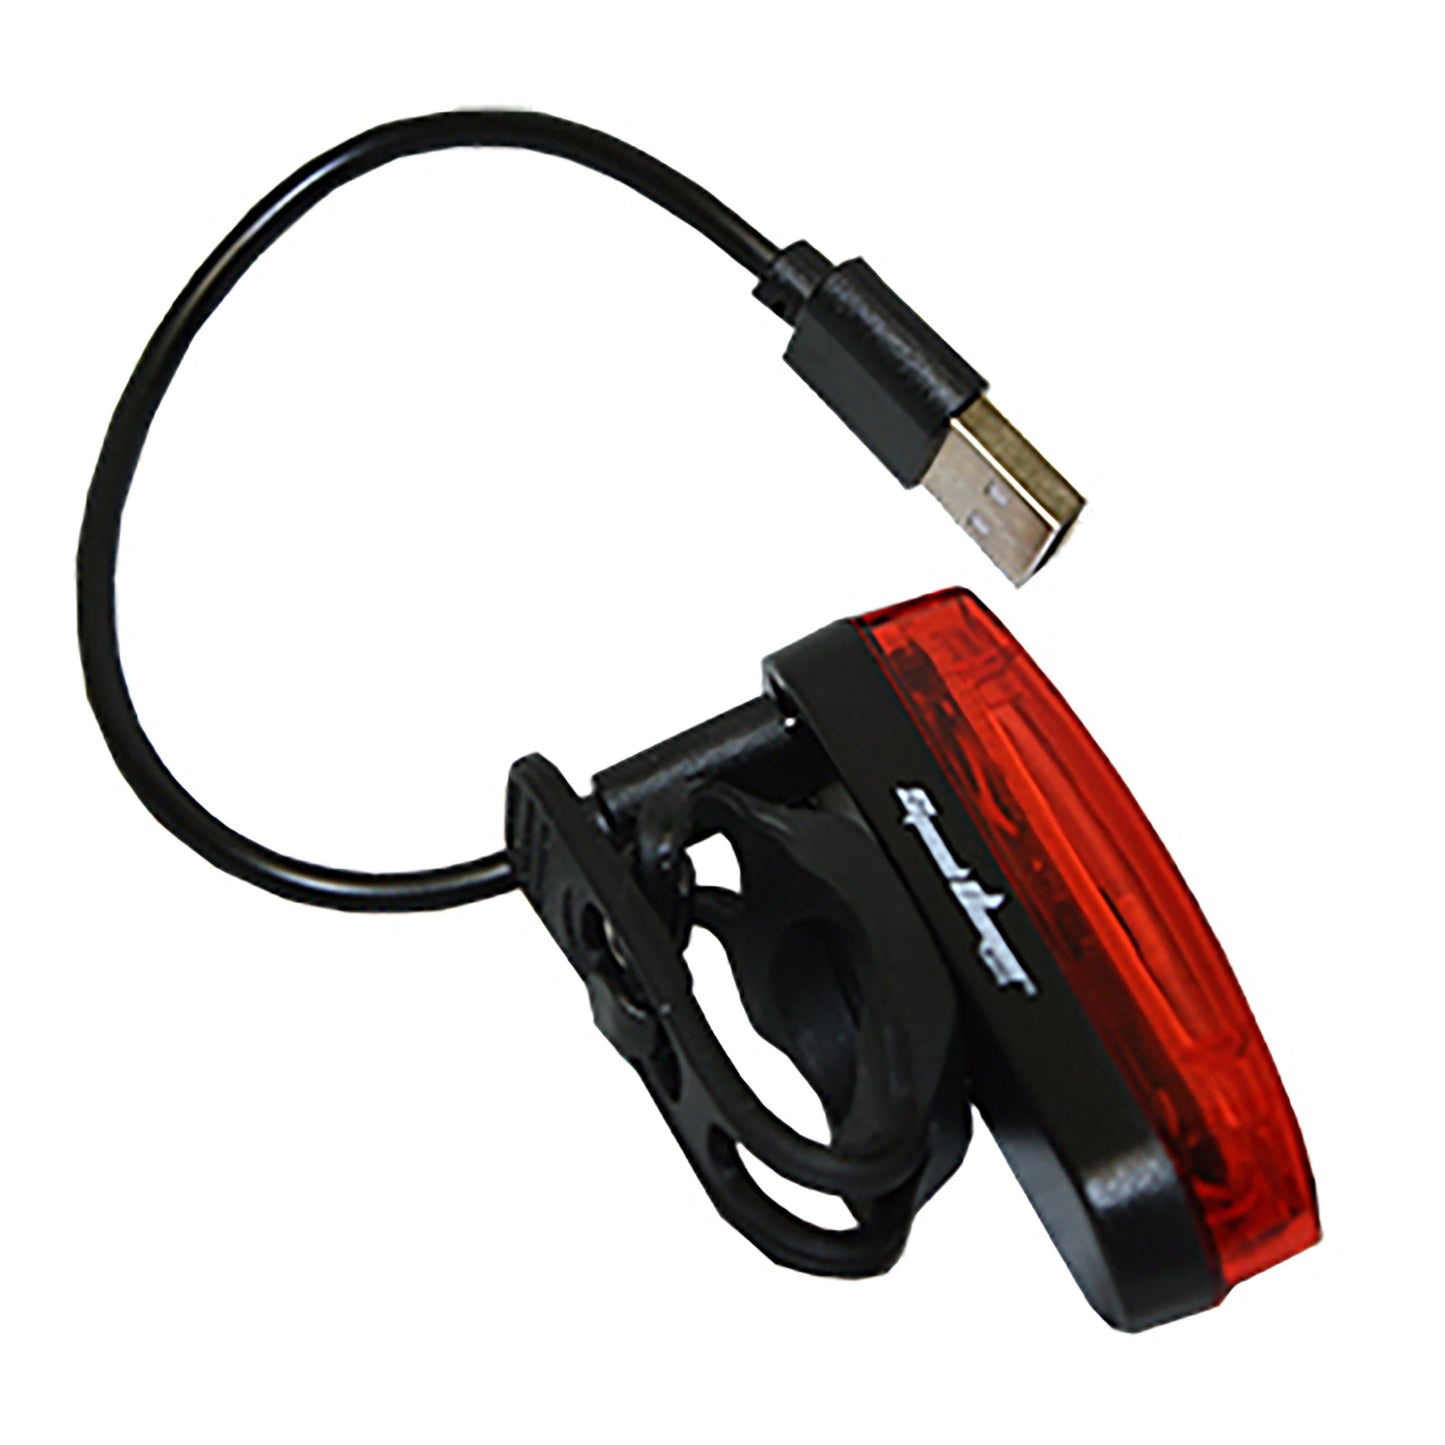 **SALE!! Dusk to Dawn Demon - Red Rear LED Bicycle Light 10-60009